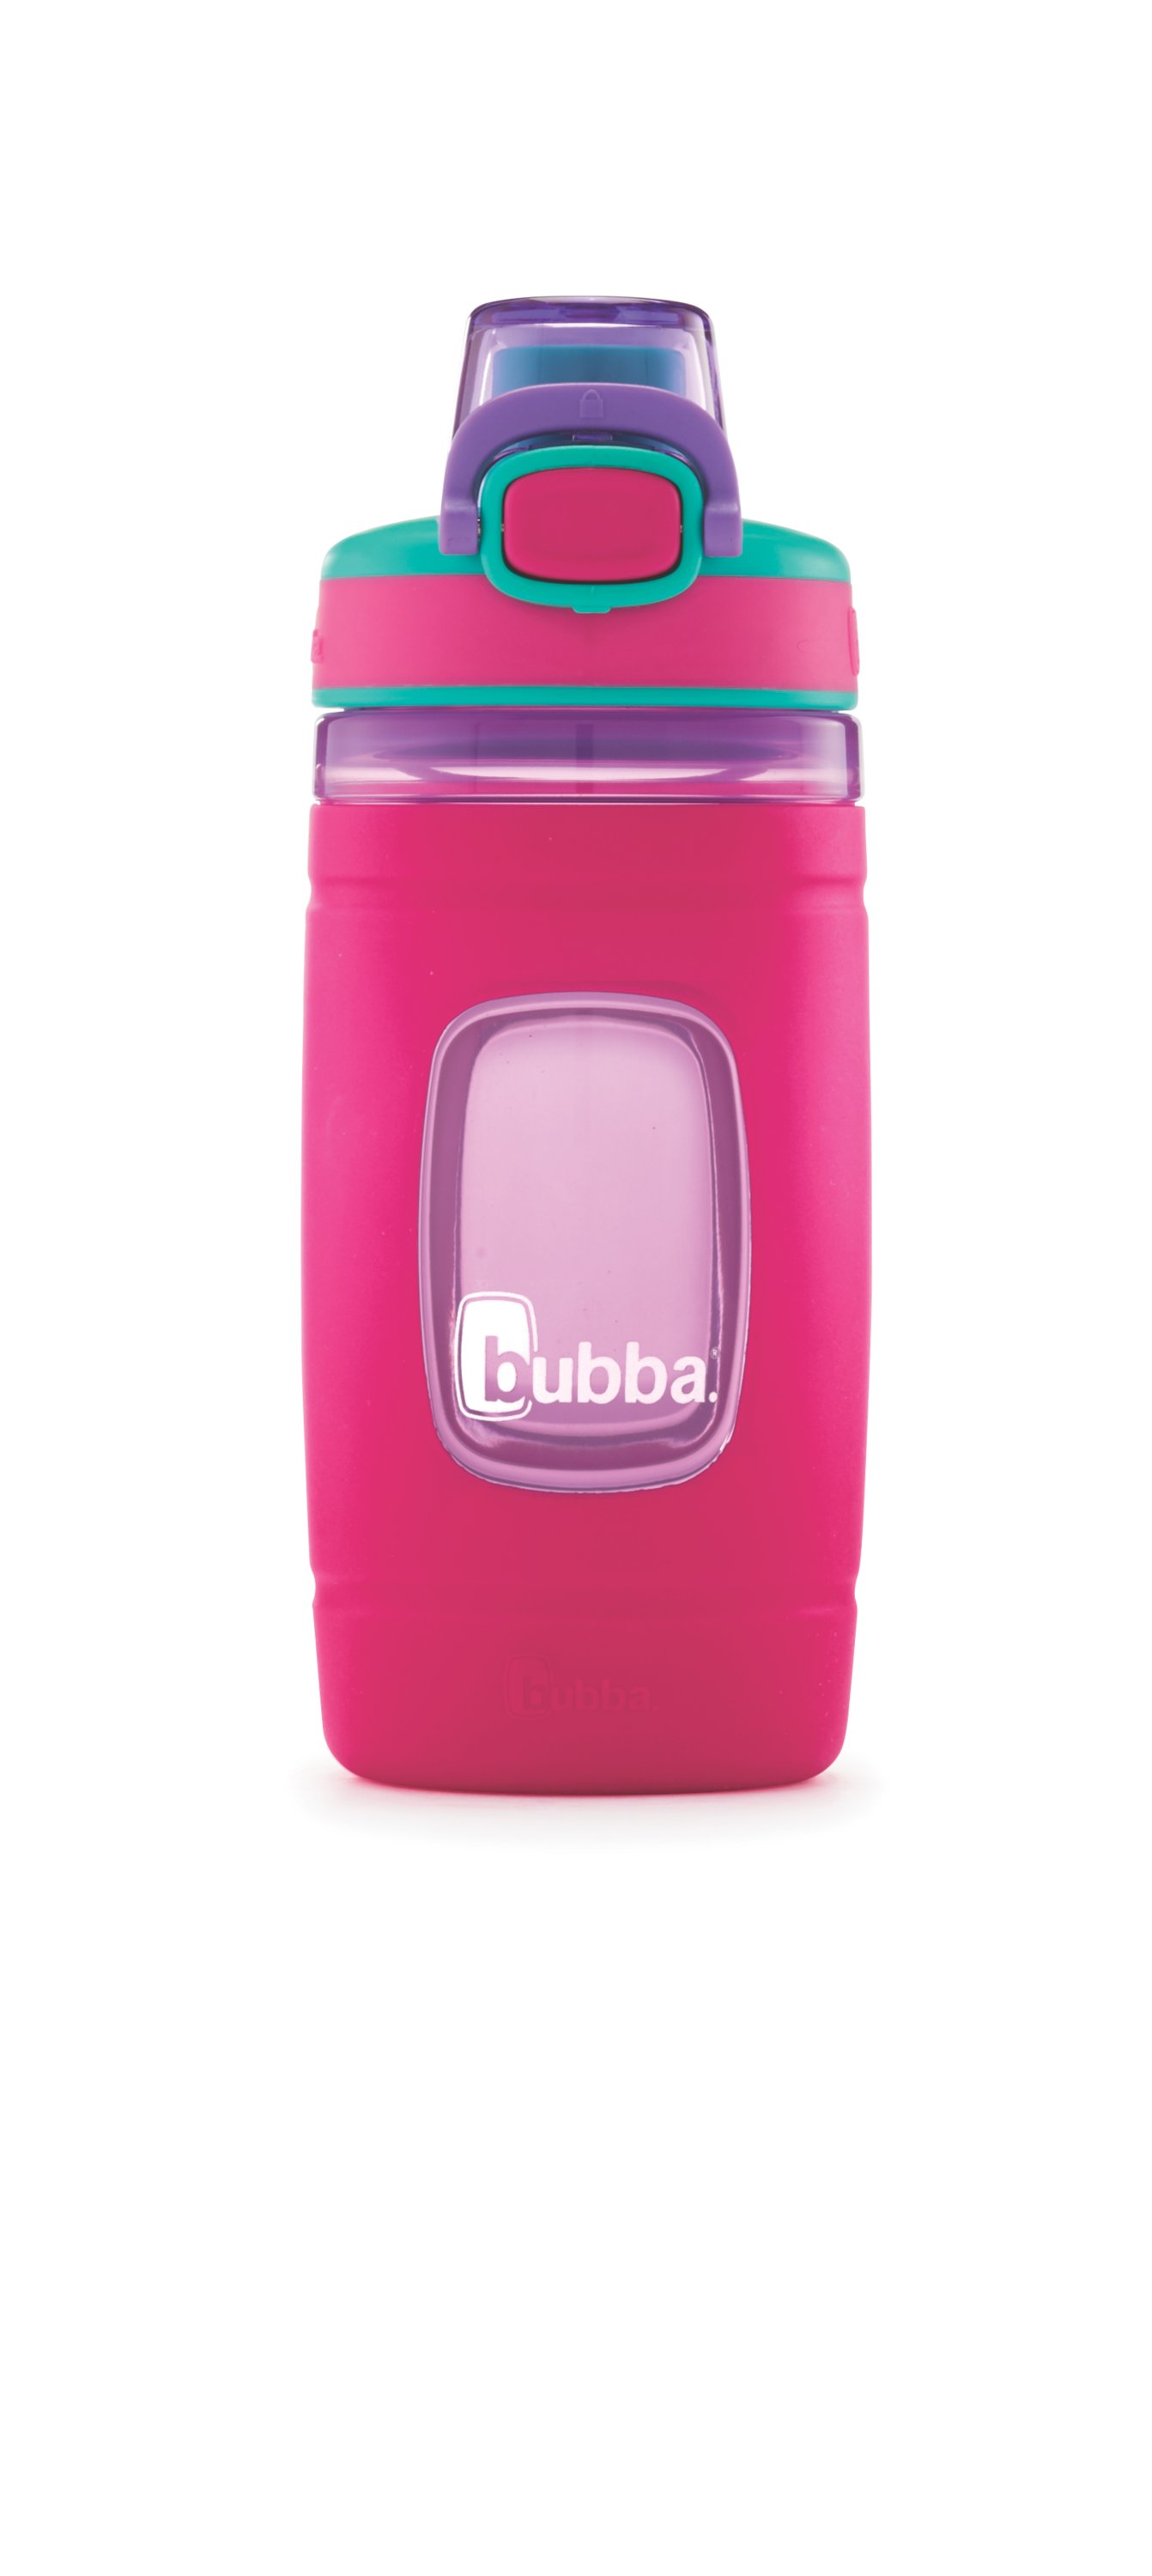 bubba Flo Kids Water Bottle with Silicone Sleeve, 16 oz., Dragon Fruit and  Juicy Grape